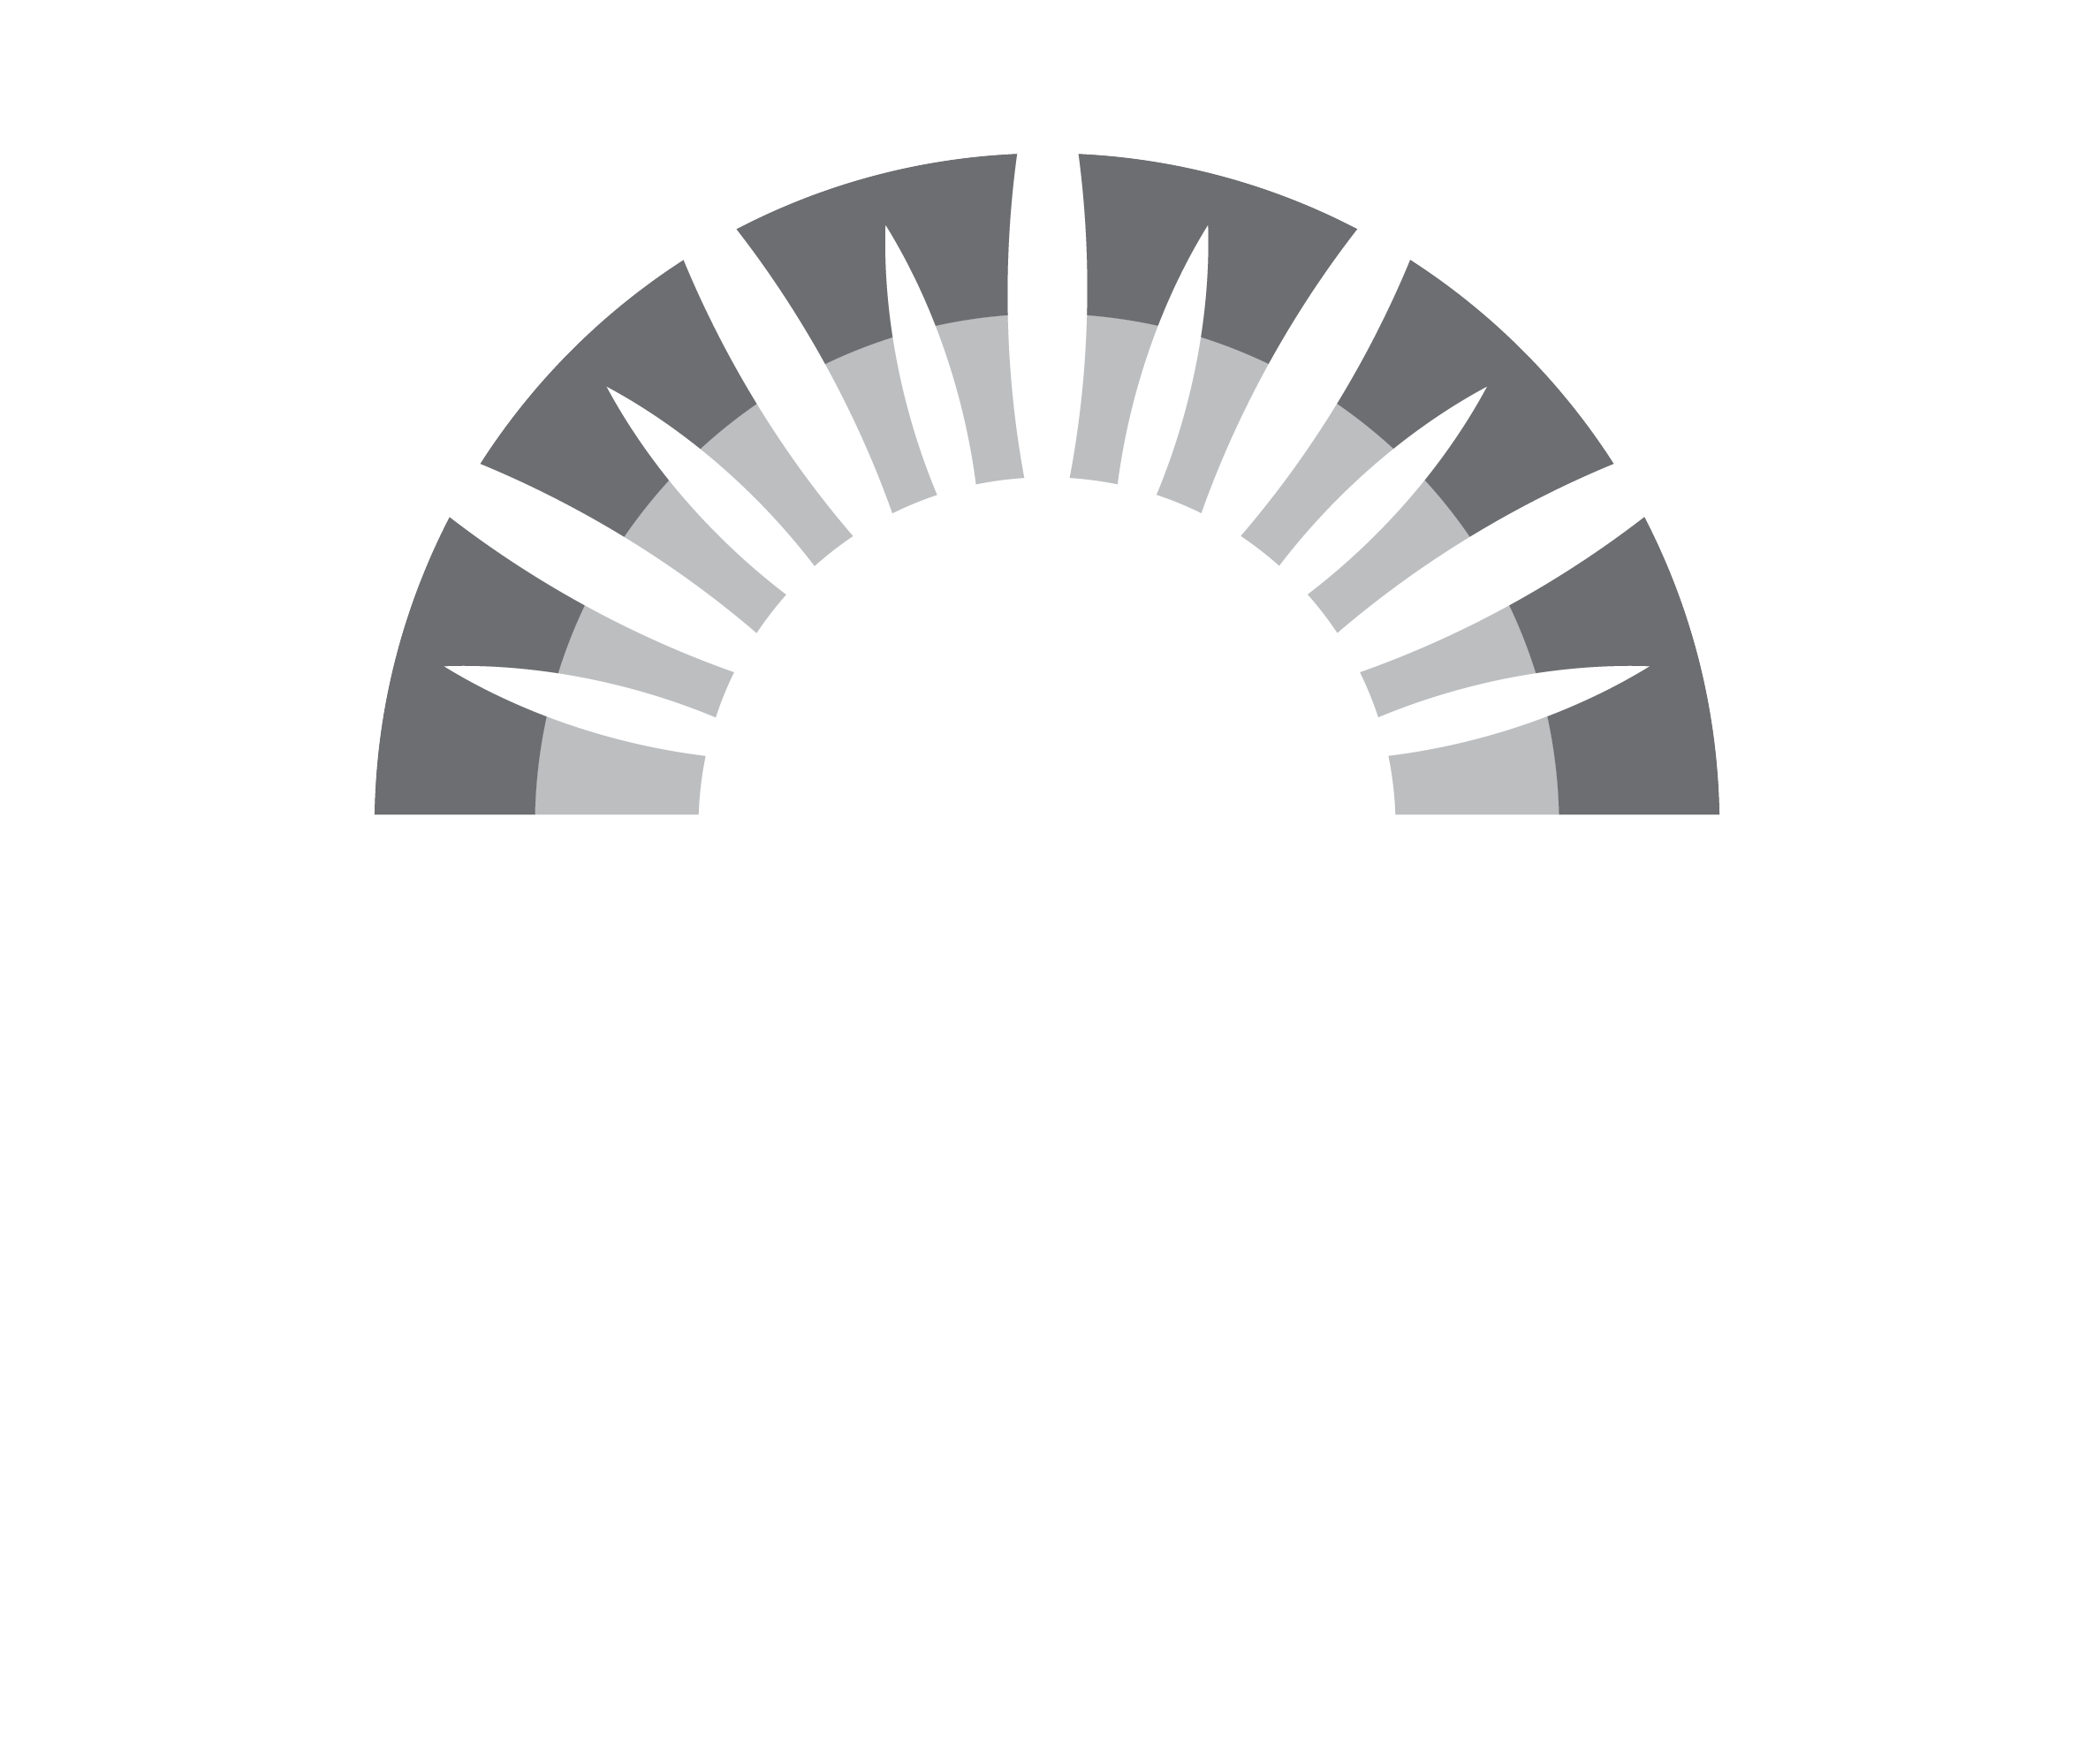 ky climate clues in forest history